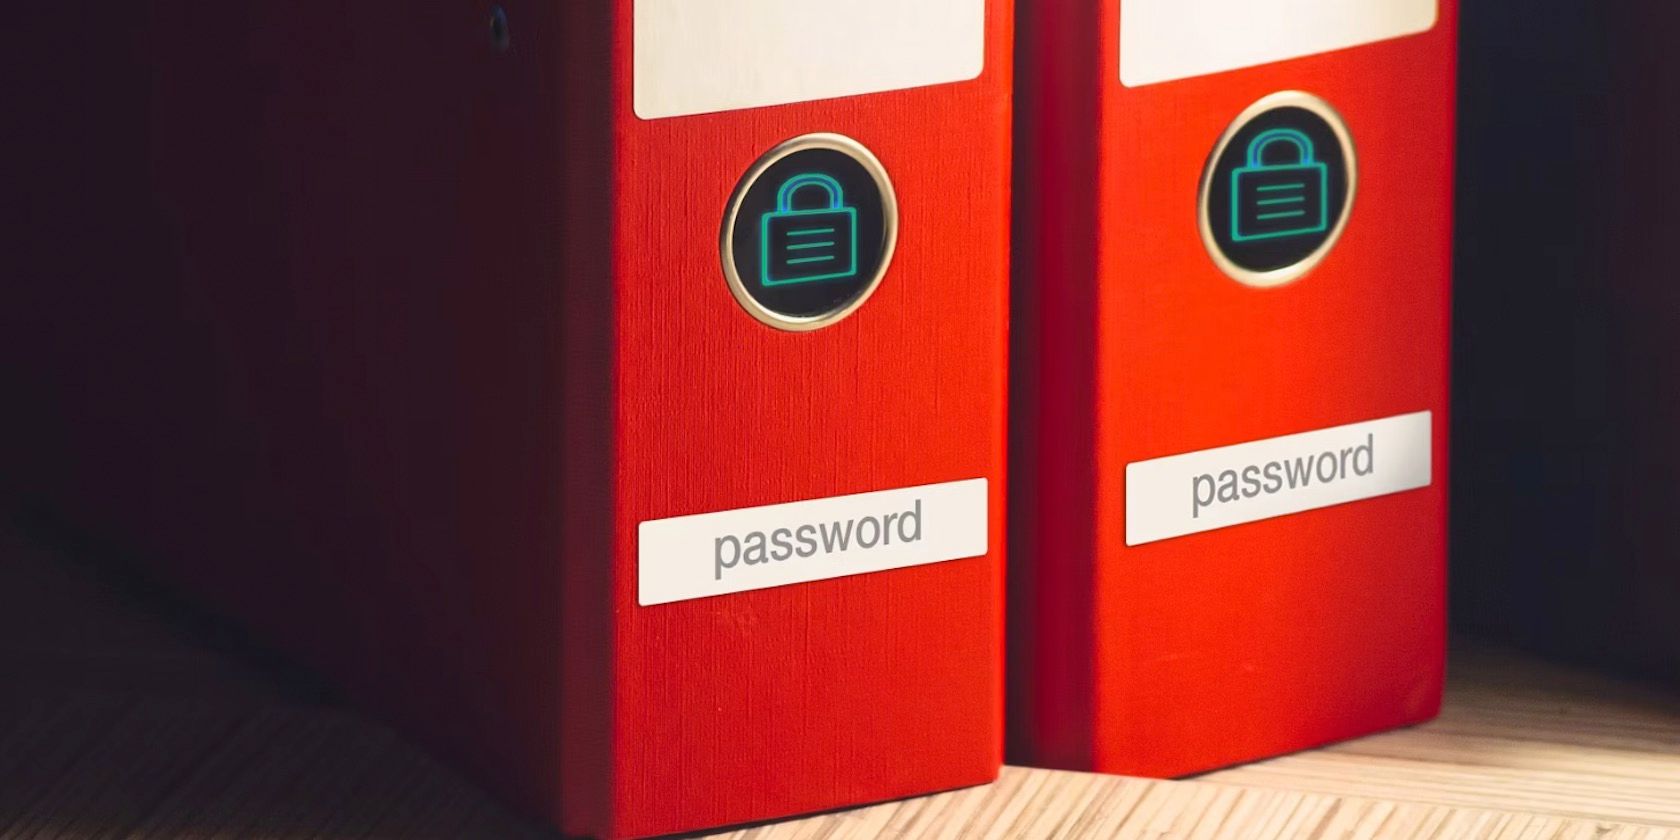 How to Password Protect Files and Folders in Linux